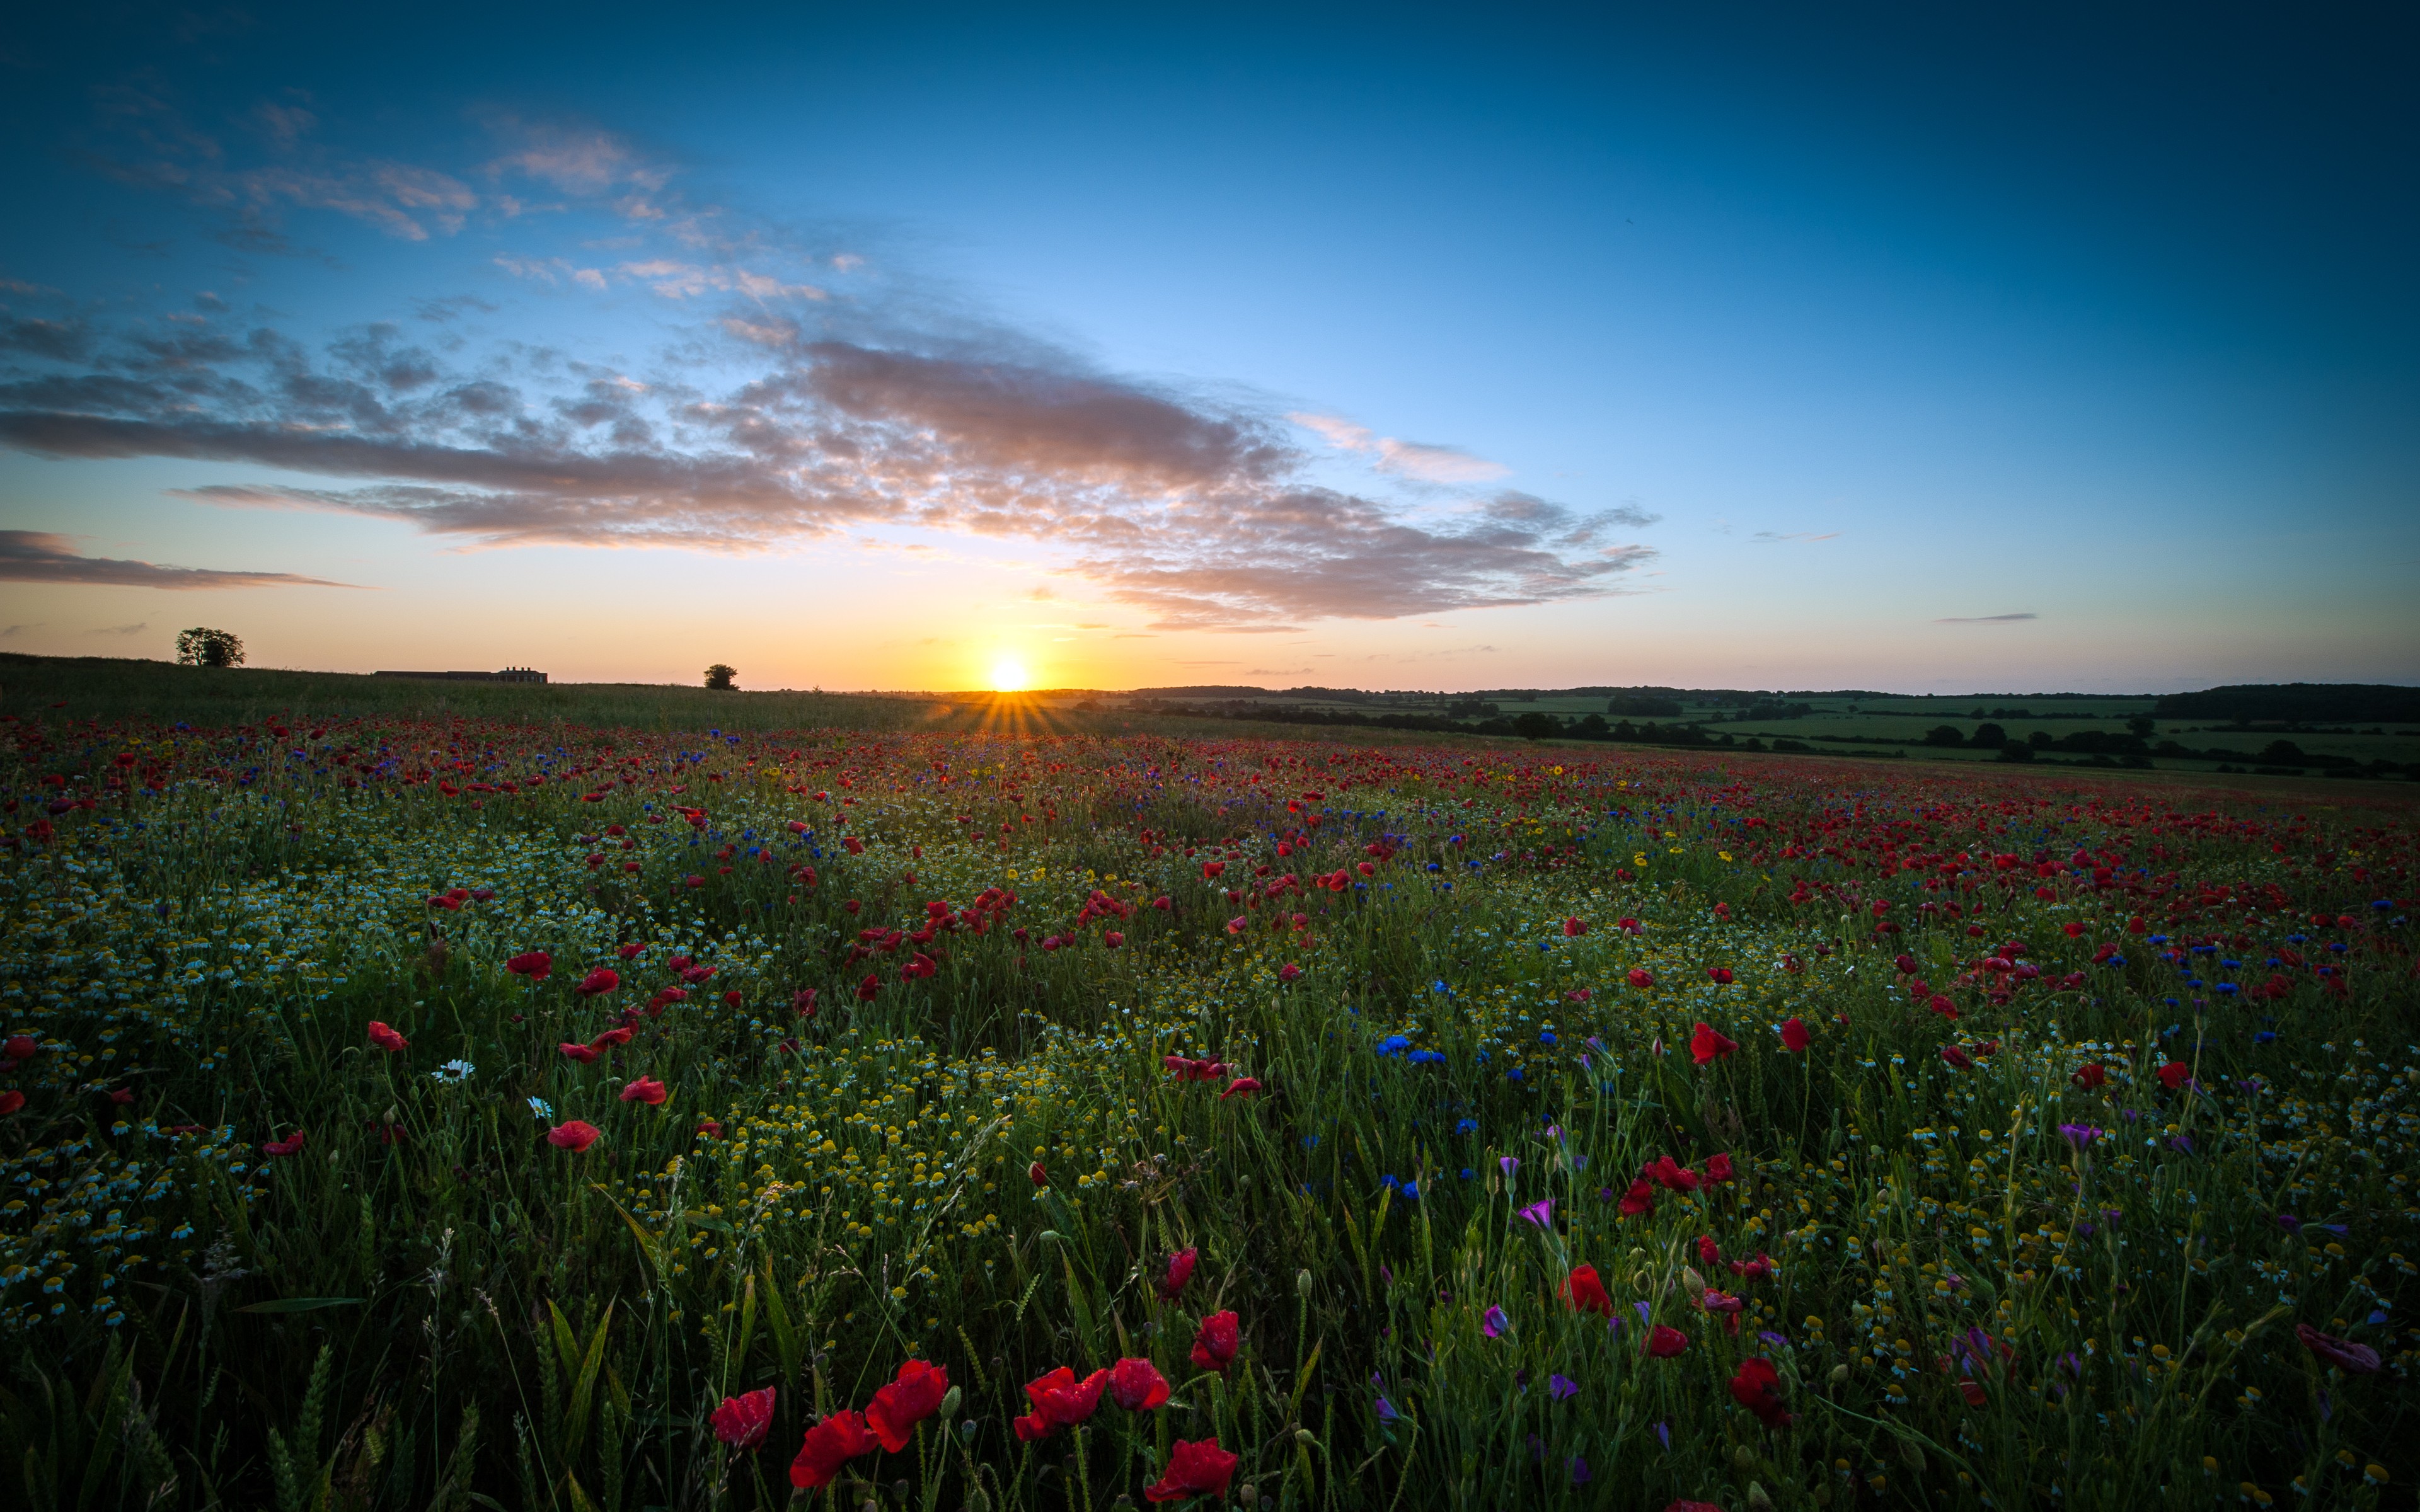 clouds, Landscapes, Nature, Sun, Dawn, Flowers, Fields, United, Kingdom, Poppies Wallpaper